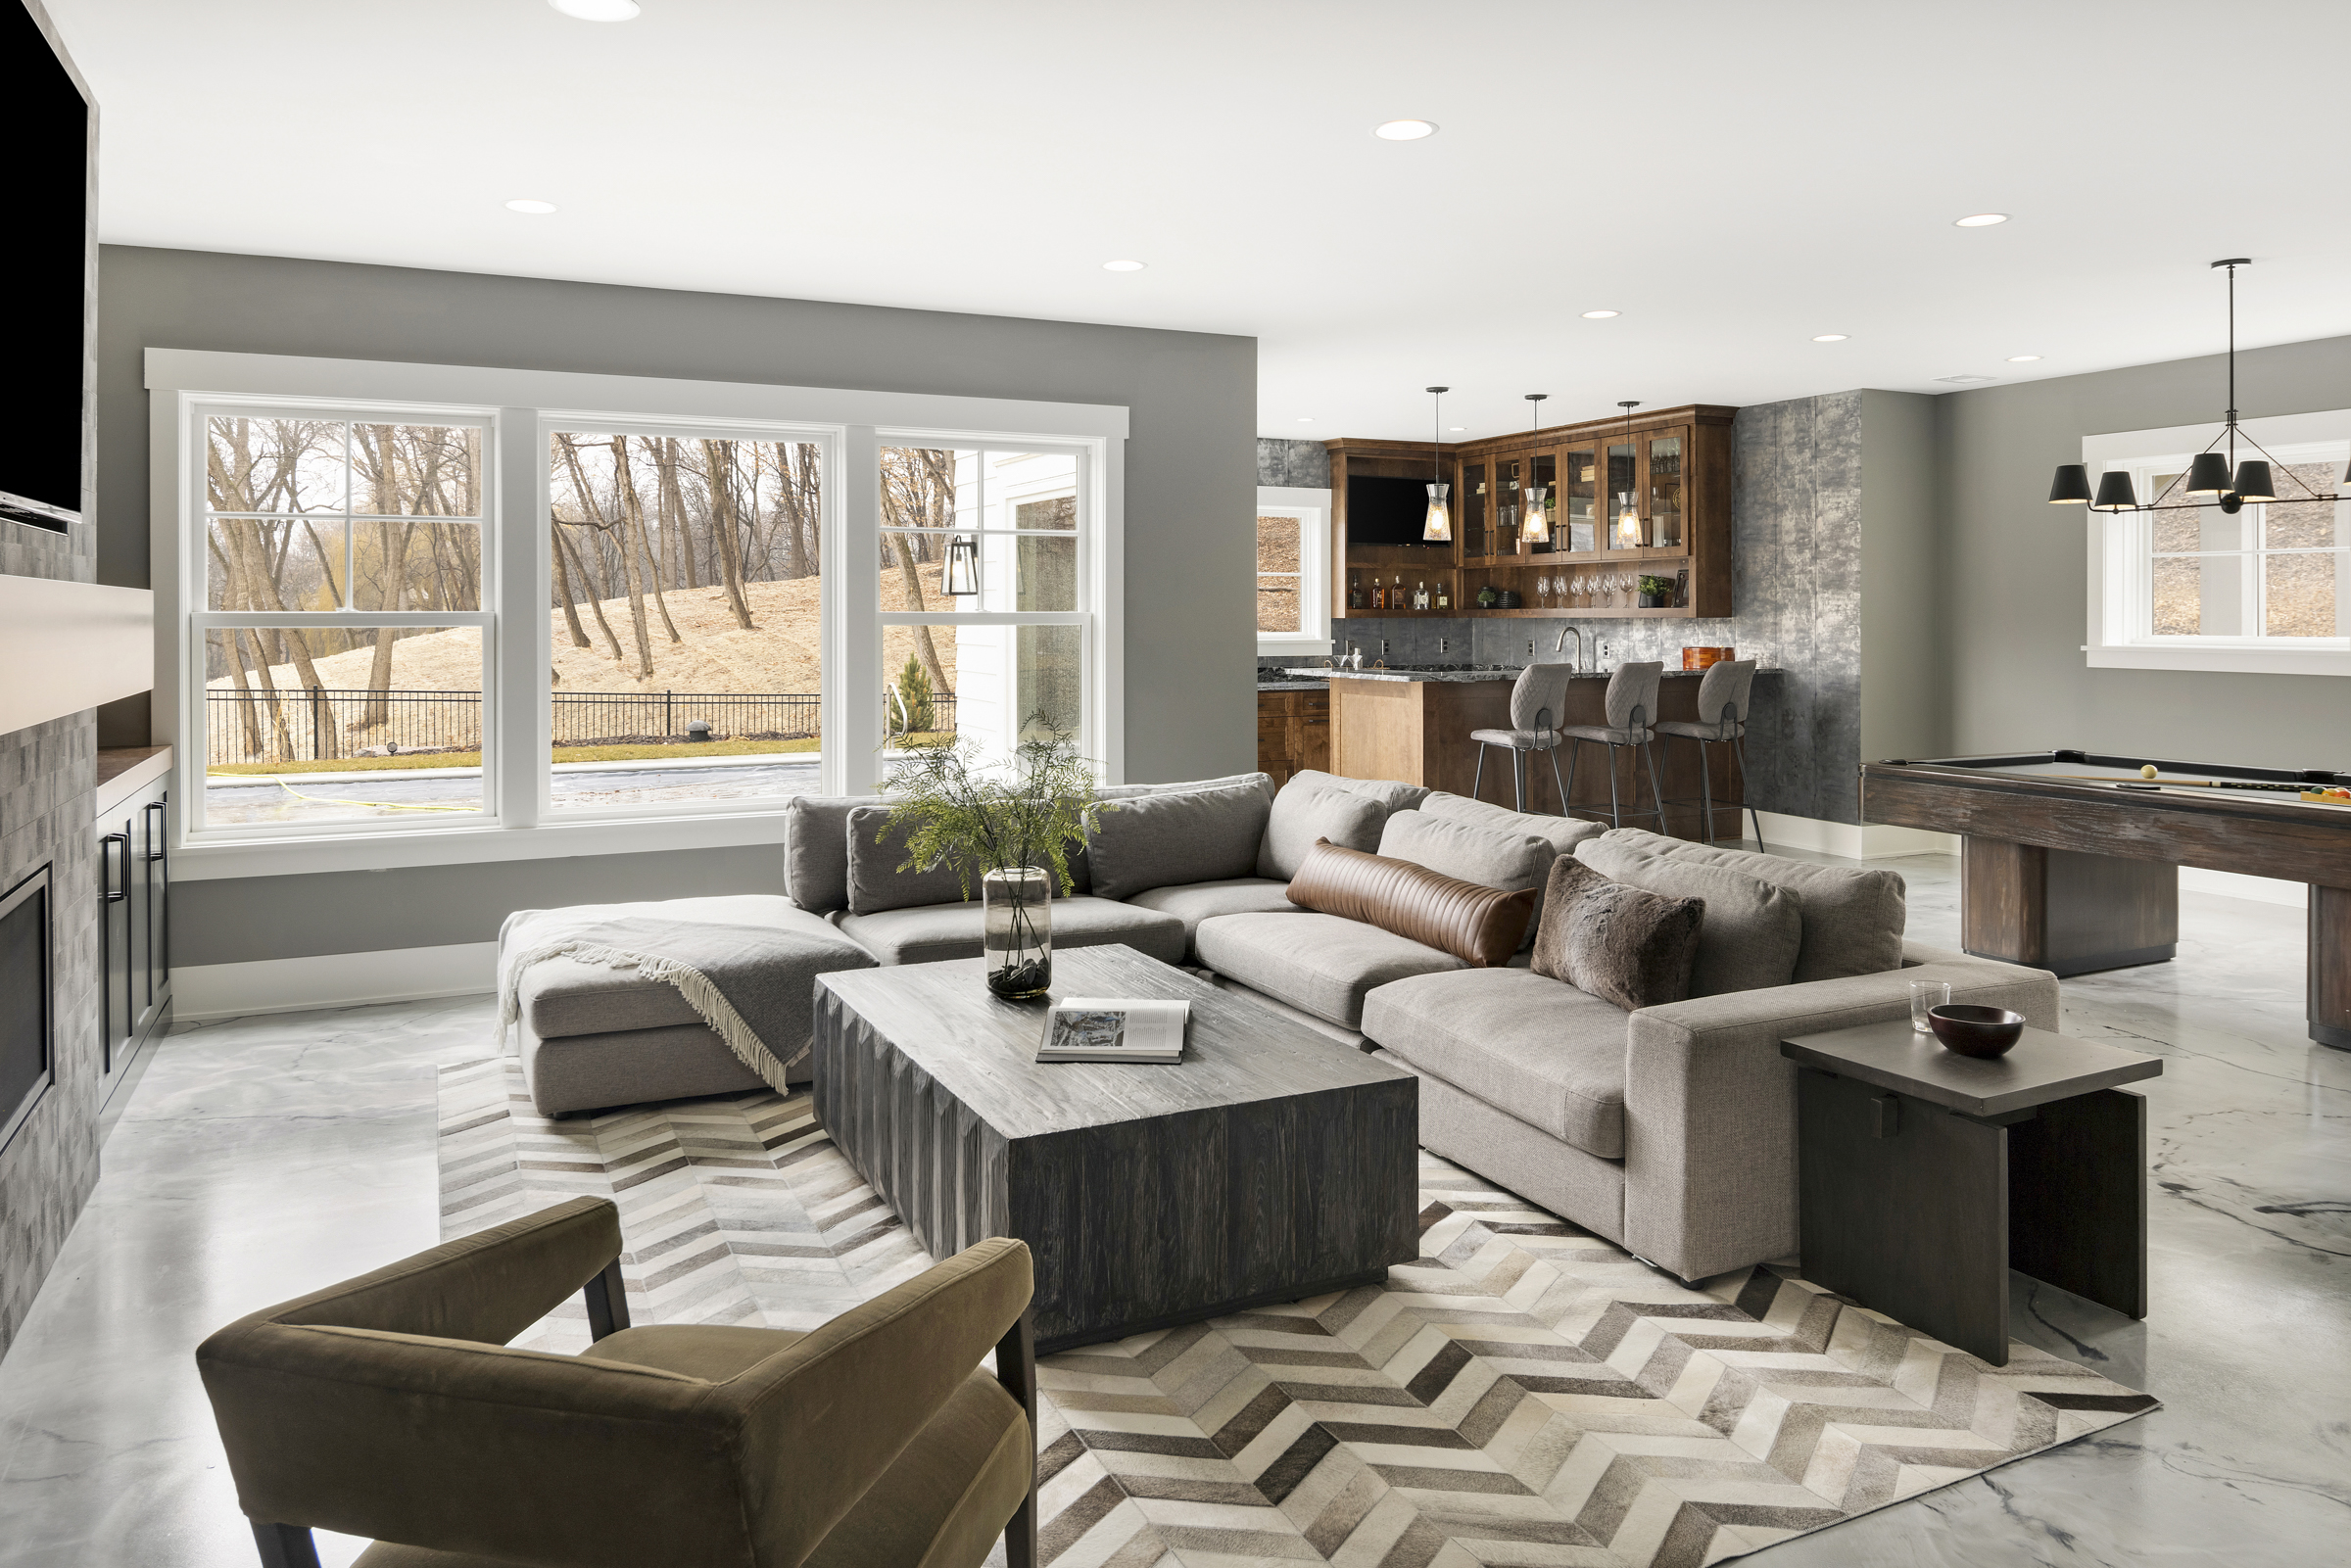 a lower level living room with a grey sectional couch, a dark coffee table, a chevron rug, and a view into the backyard through three large windows